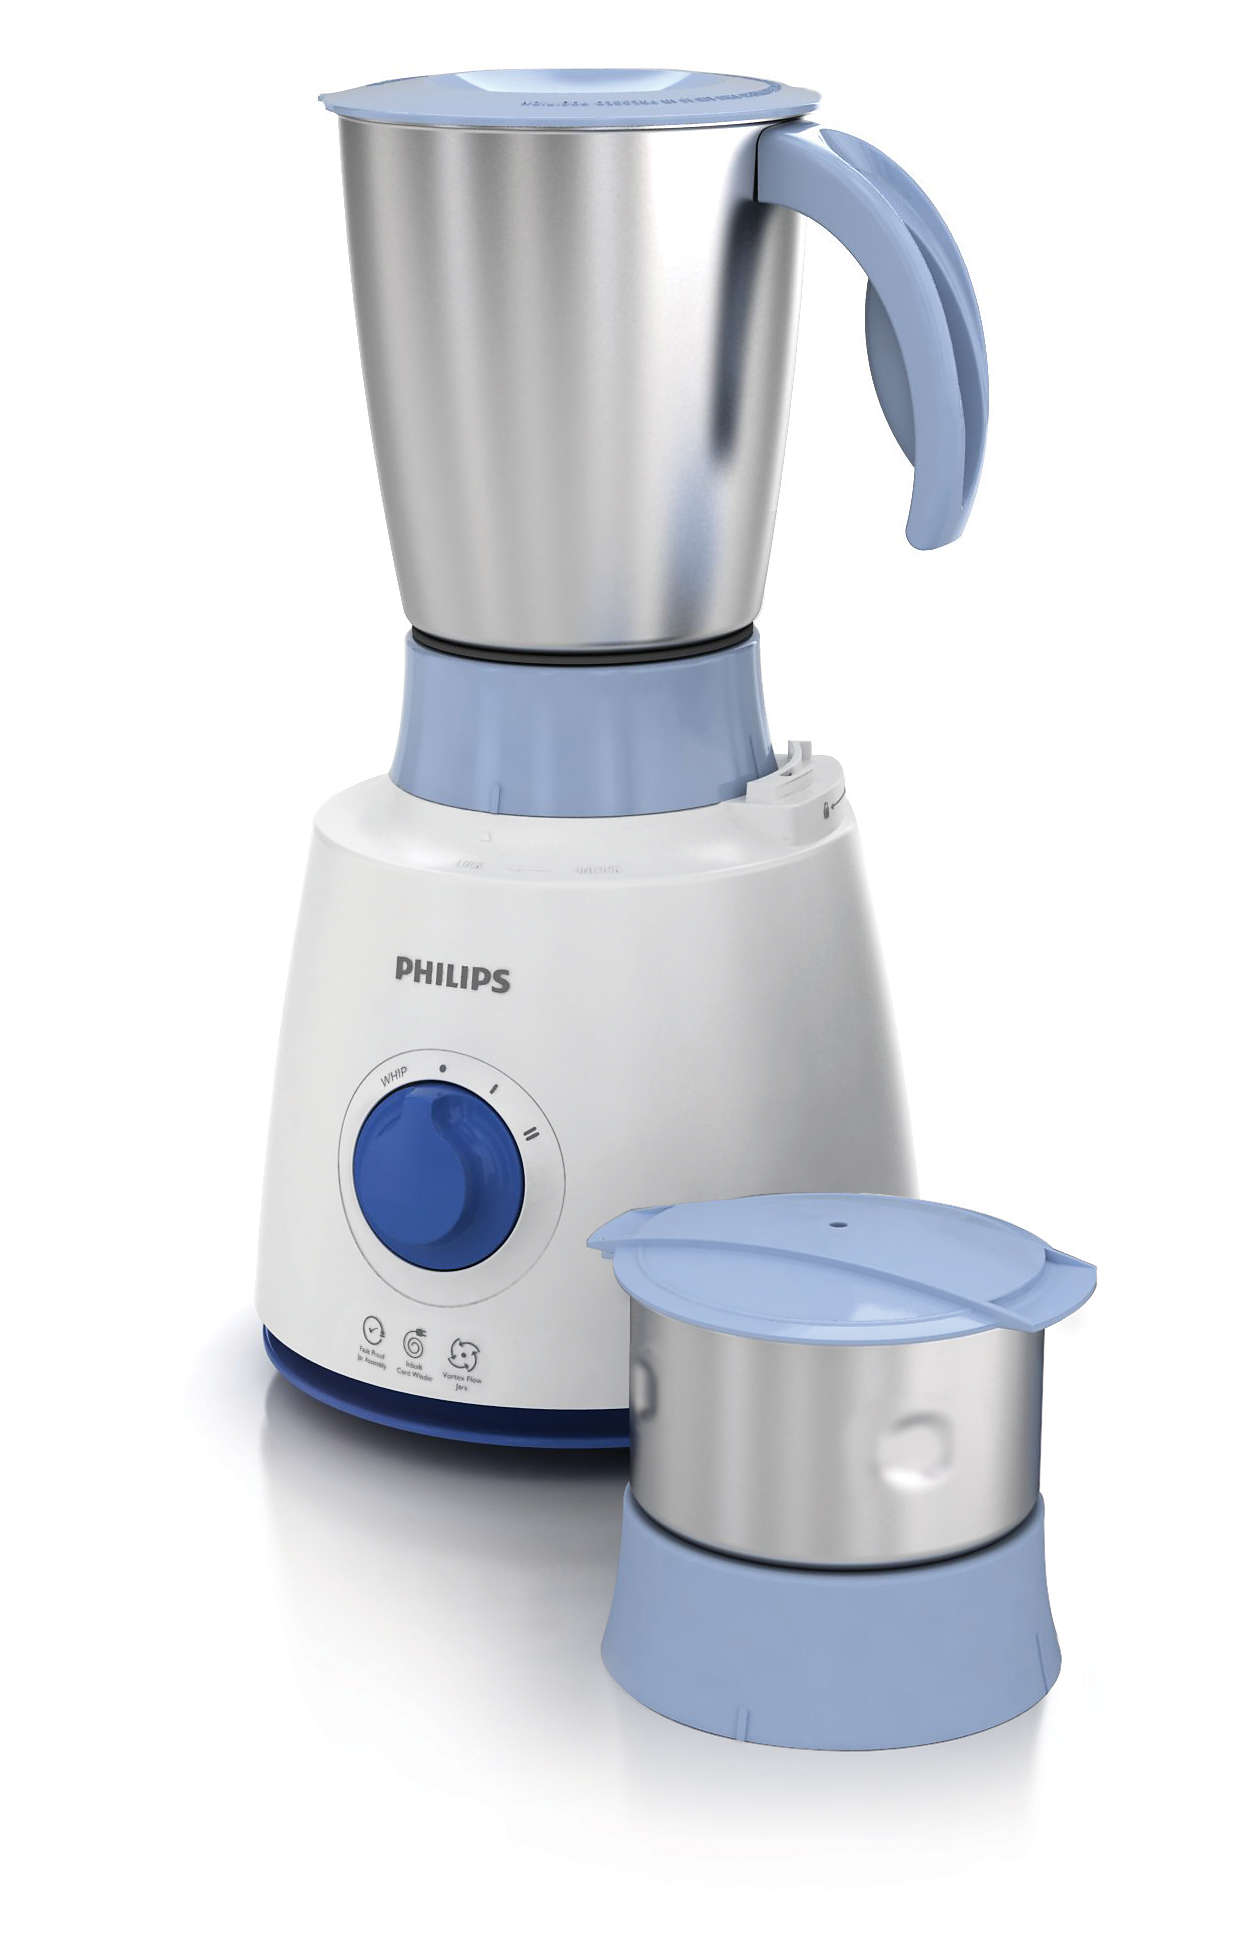 Mixer Grinder gives Tasty Meals, Every time